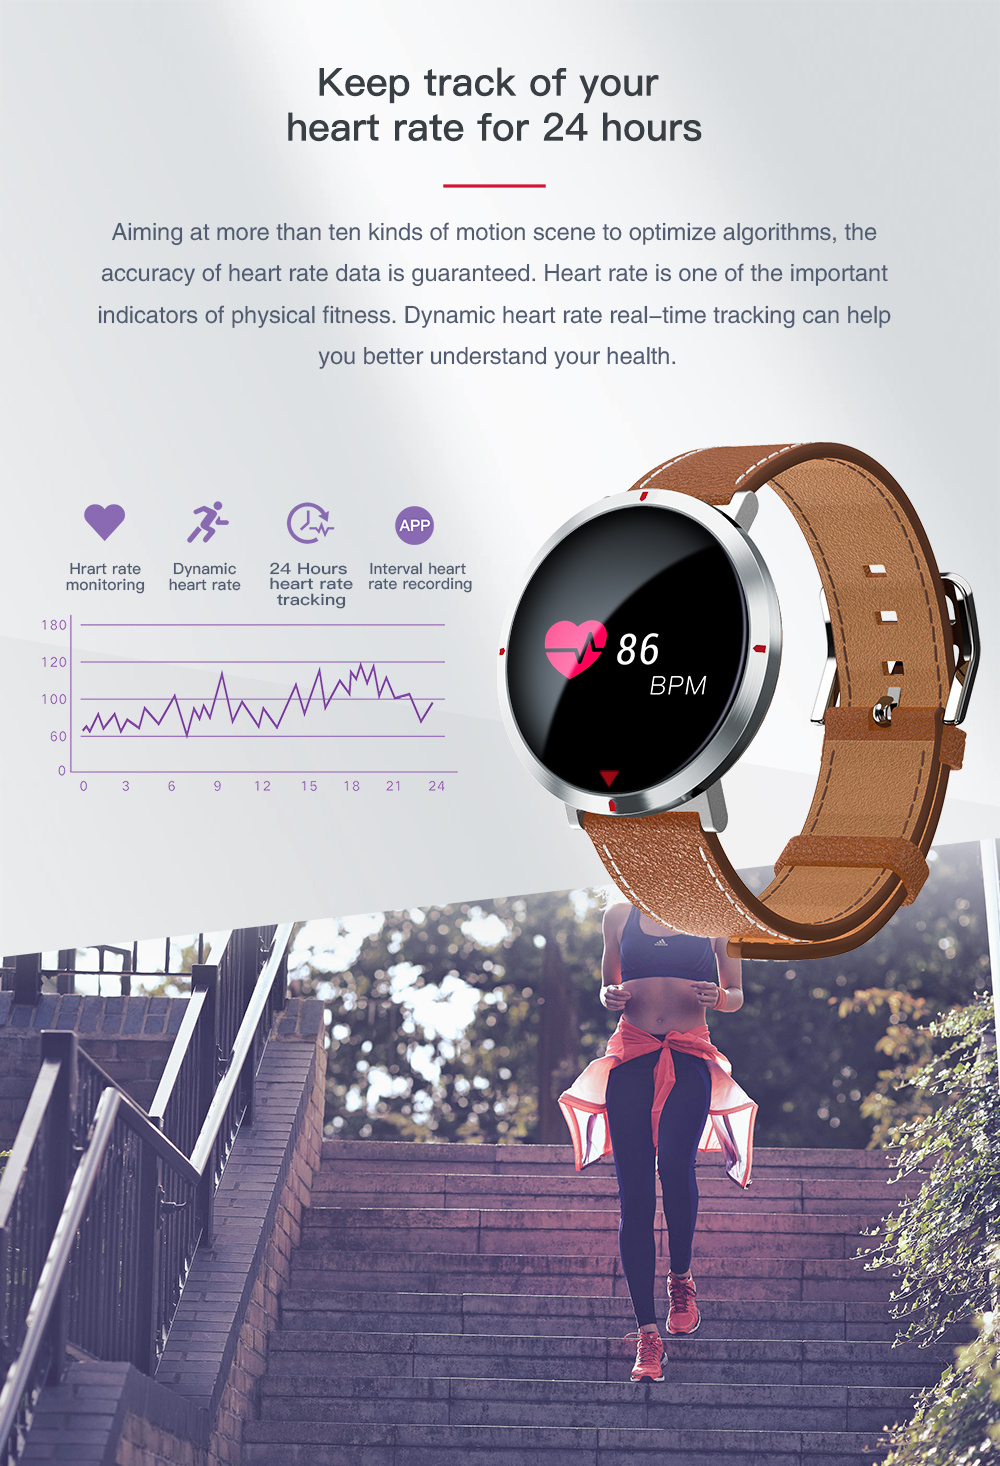 2018 Distributor Newest Round Color Display Screen Sport Fitness Smart Watch with Heart Rate/Sleep Monitoring/Pedometer/Sedentary Reminder/Blood Pressure